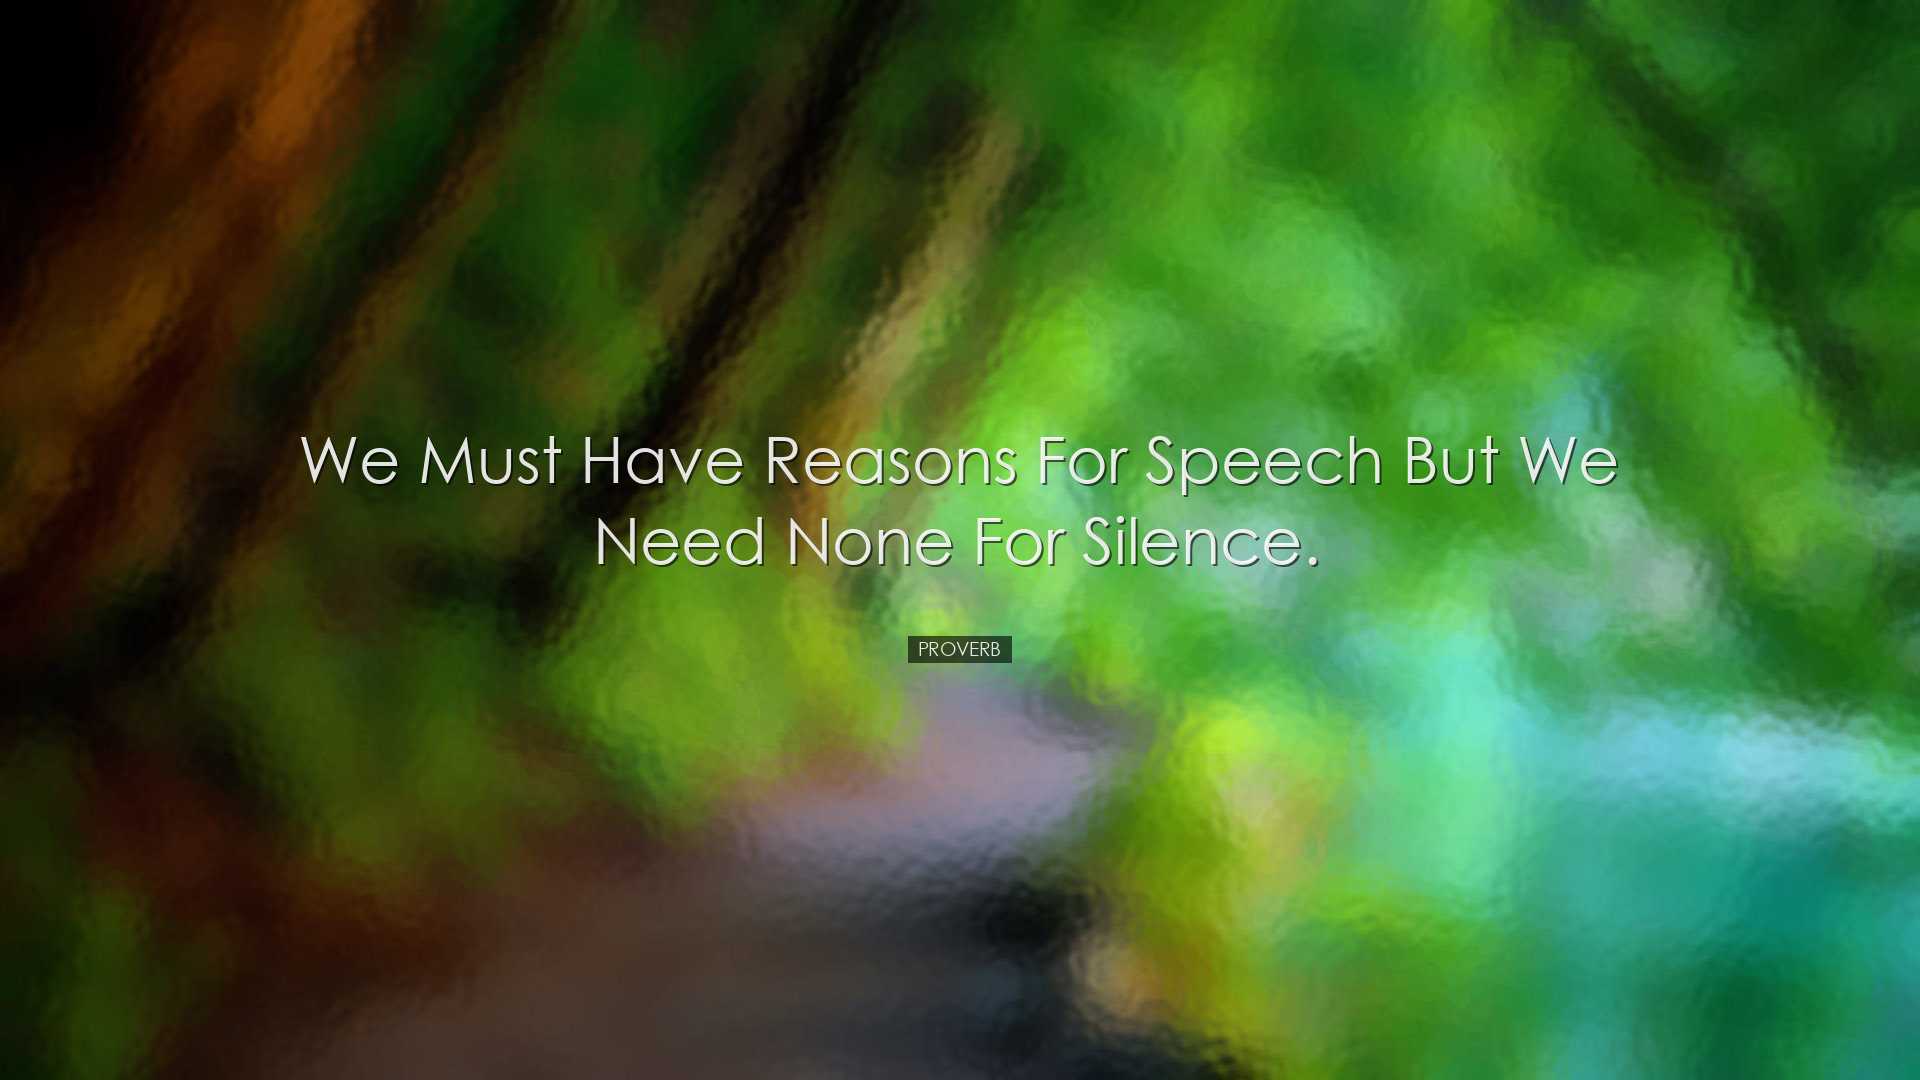 We must have reasons for speech but we need none for silence. - Pr